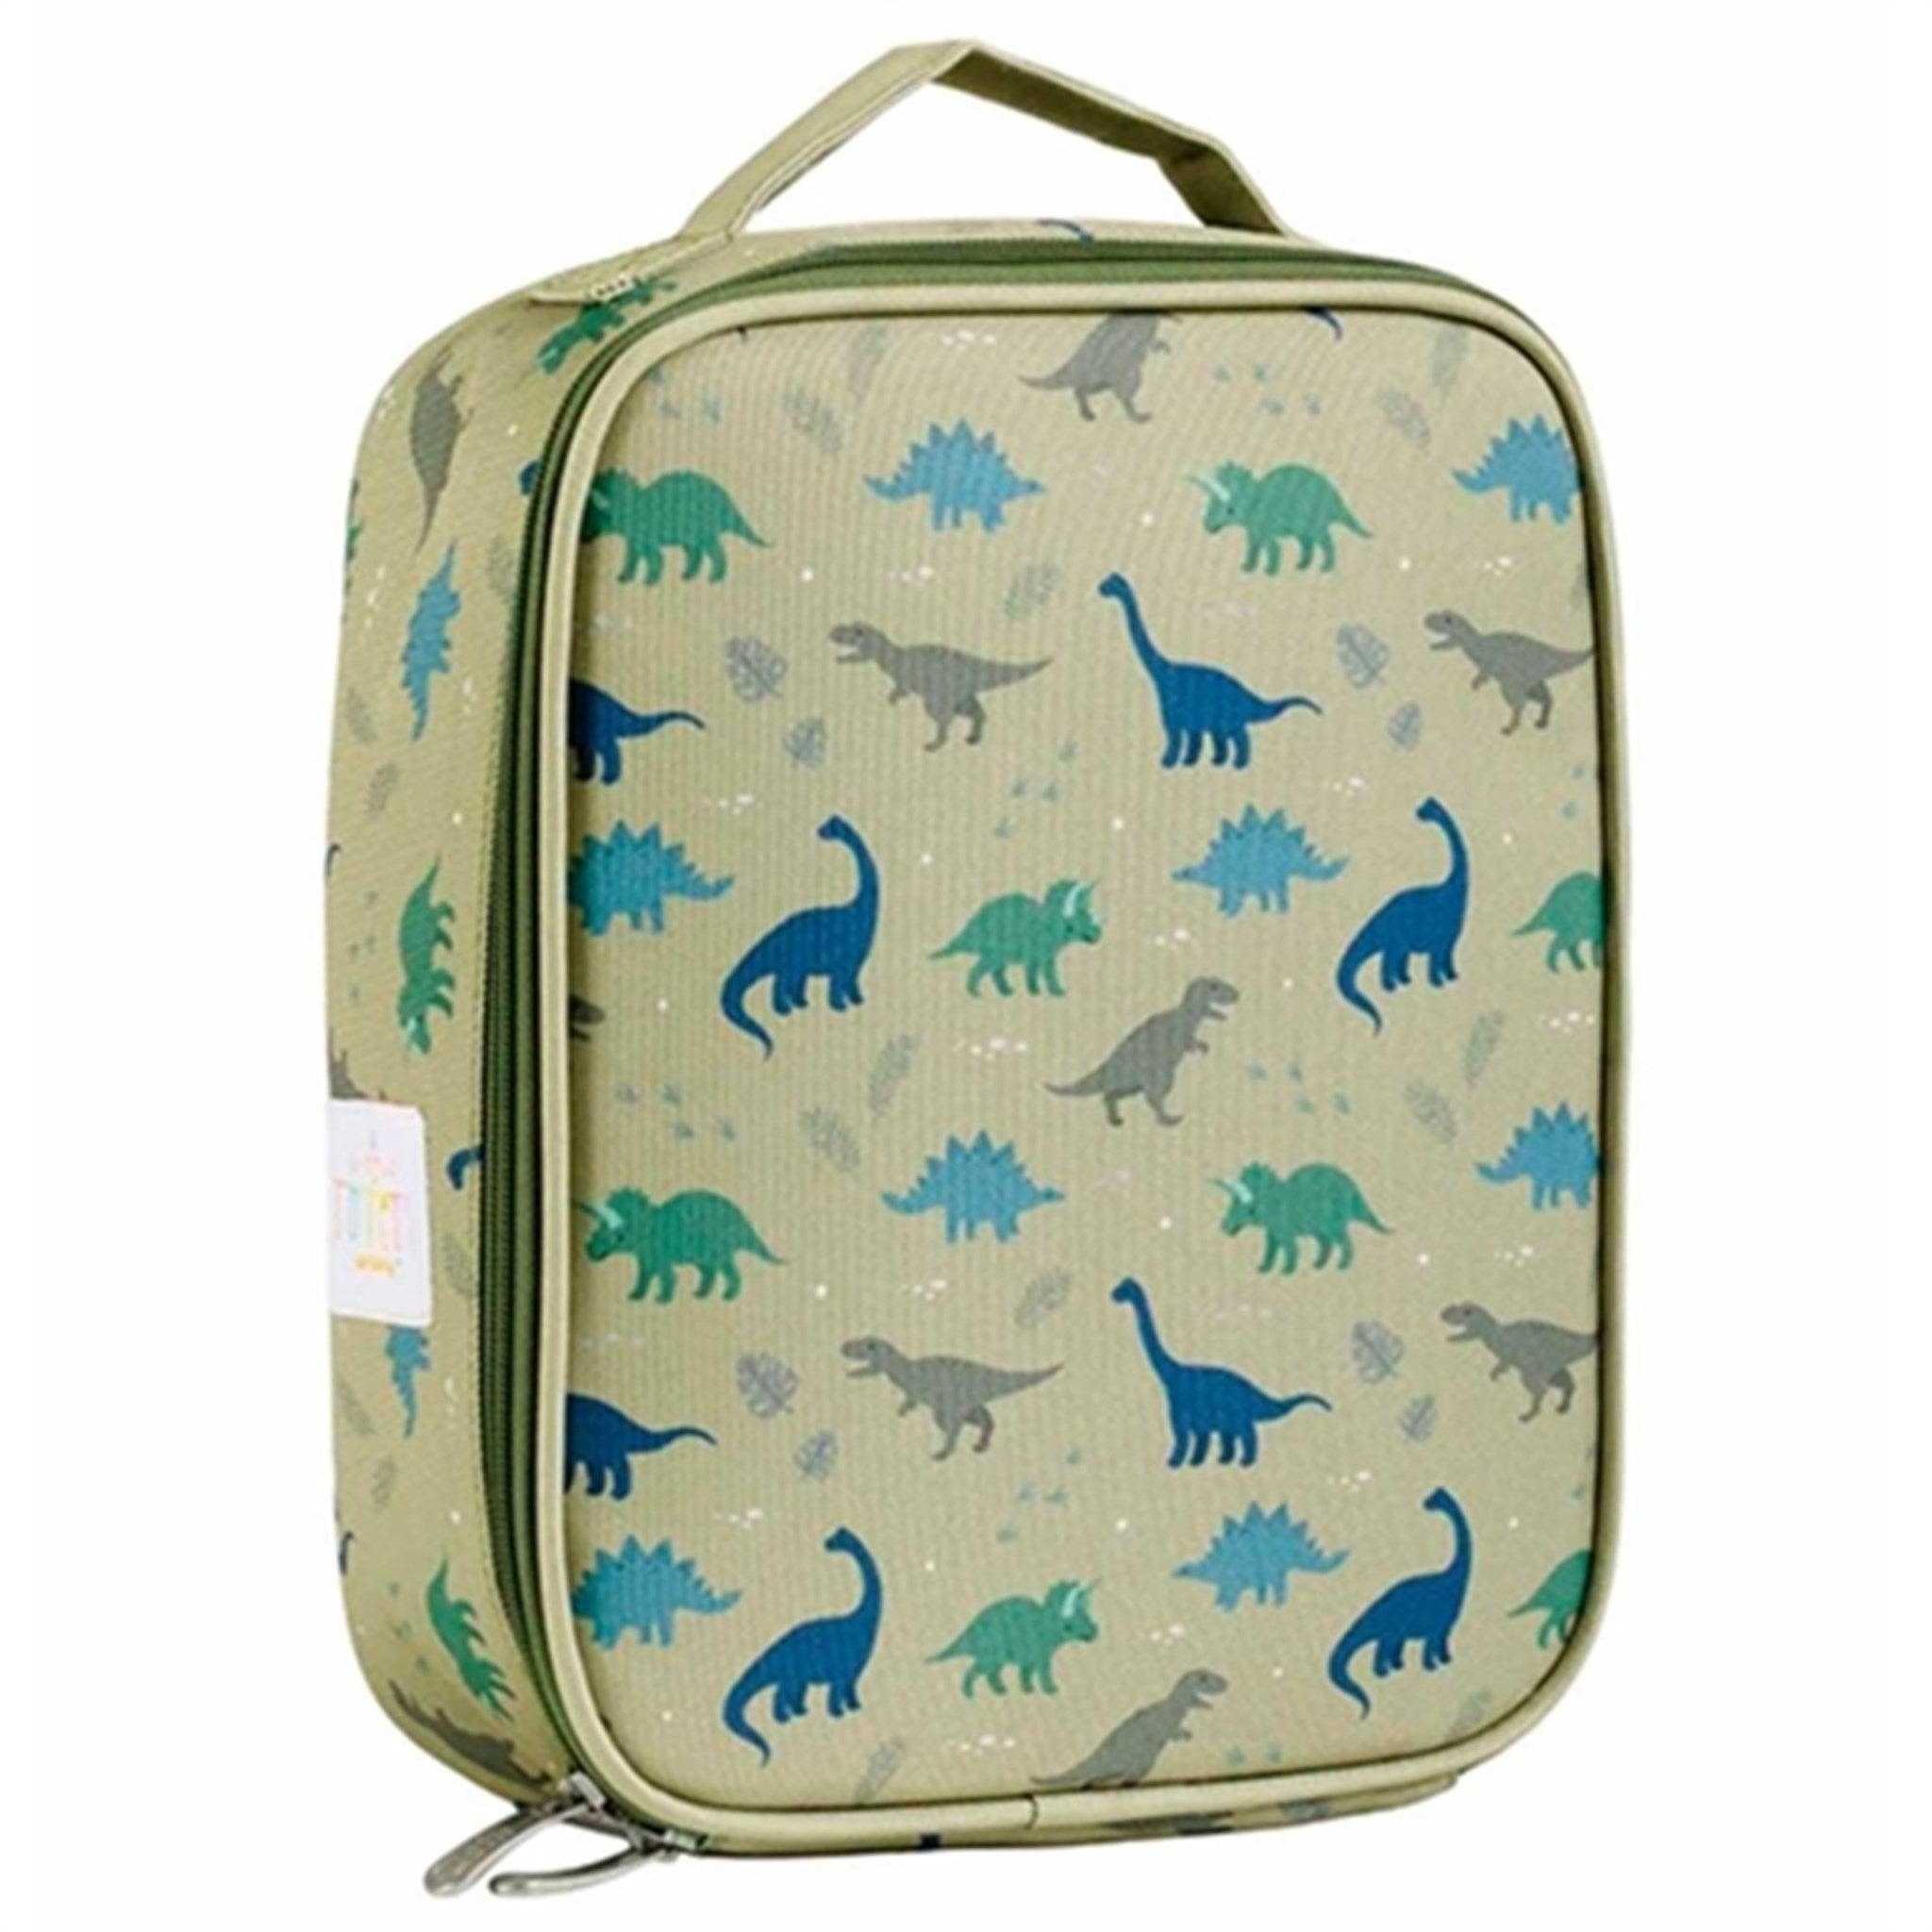 A Little Love Company Cool Bag Dinosaurs